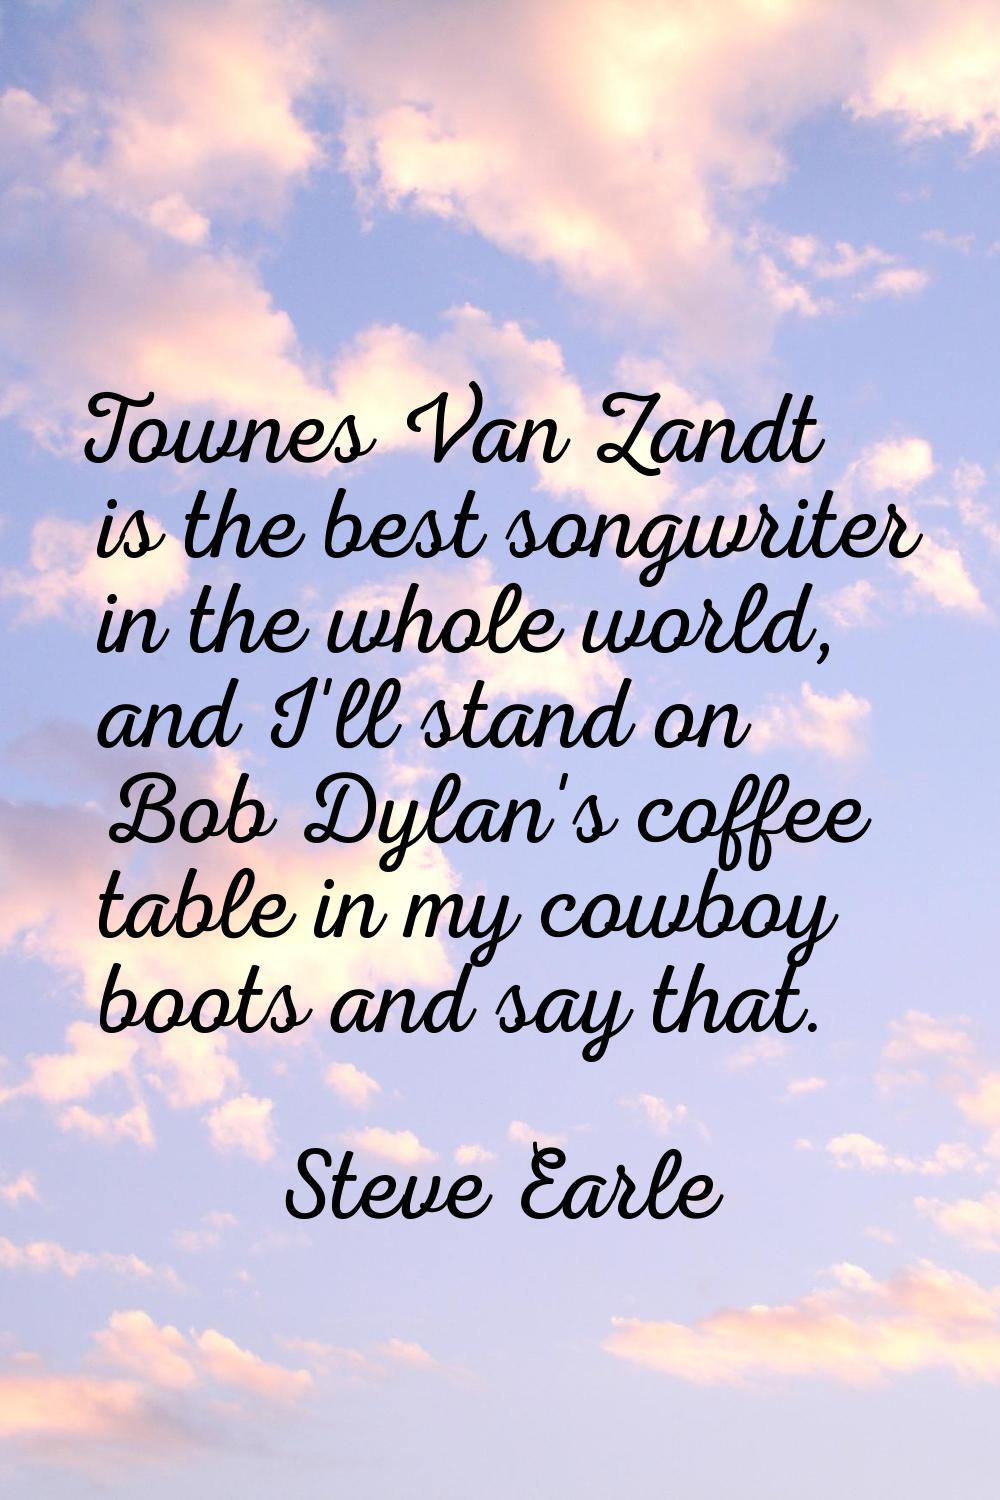 Townes Van Zandt is the best songwriter in the whole world, and I'll stand on Bob Dylan's coffee ta